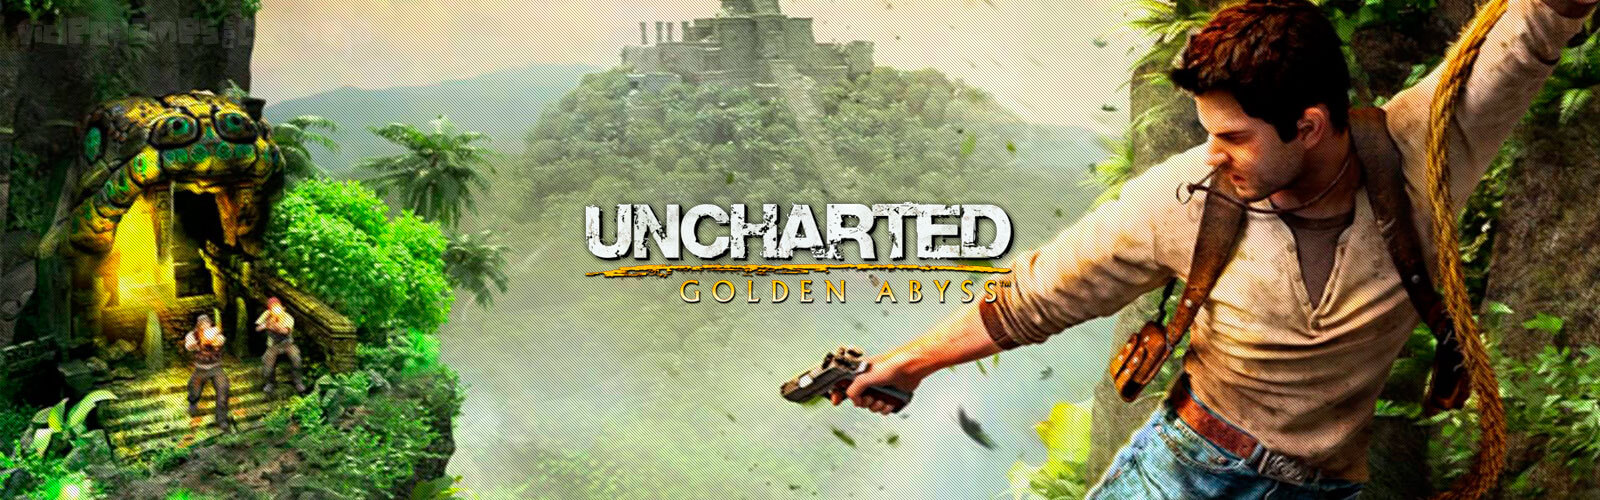 Análise - Uncharted: Golden Abyss Cover